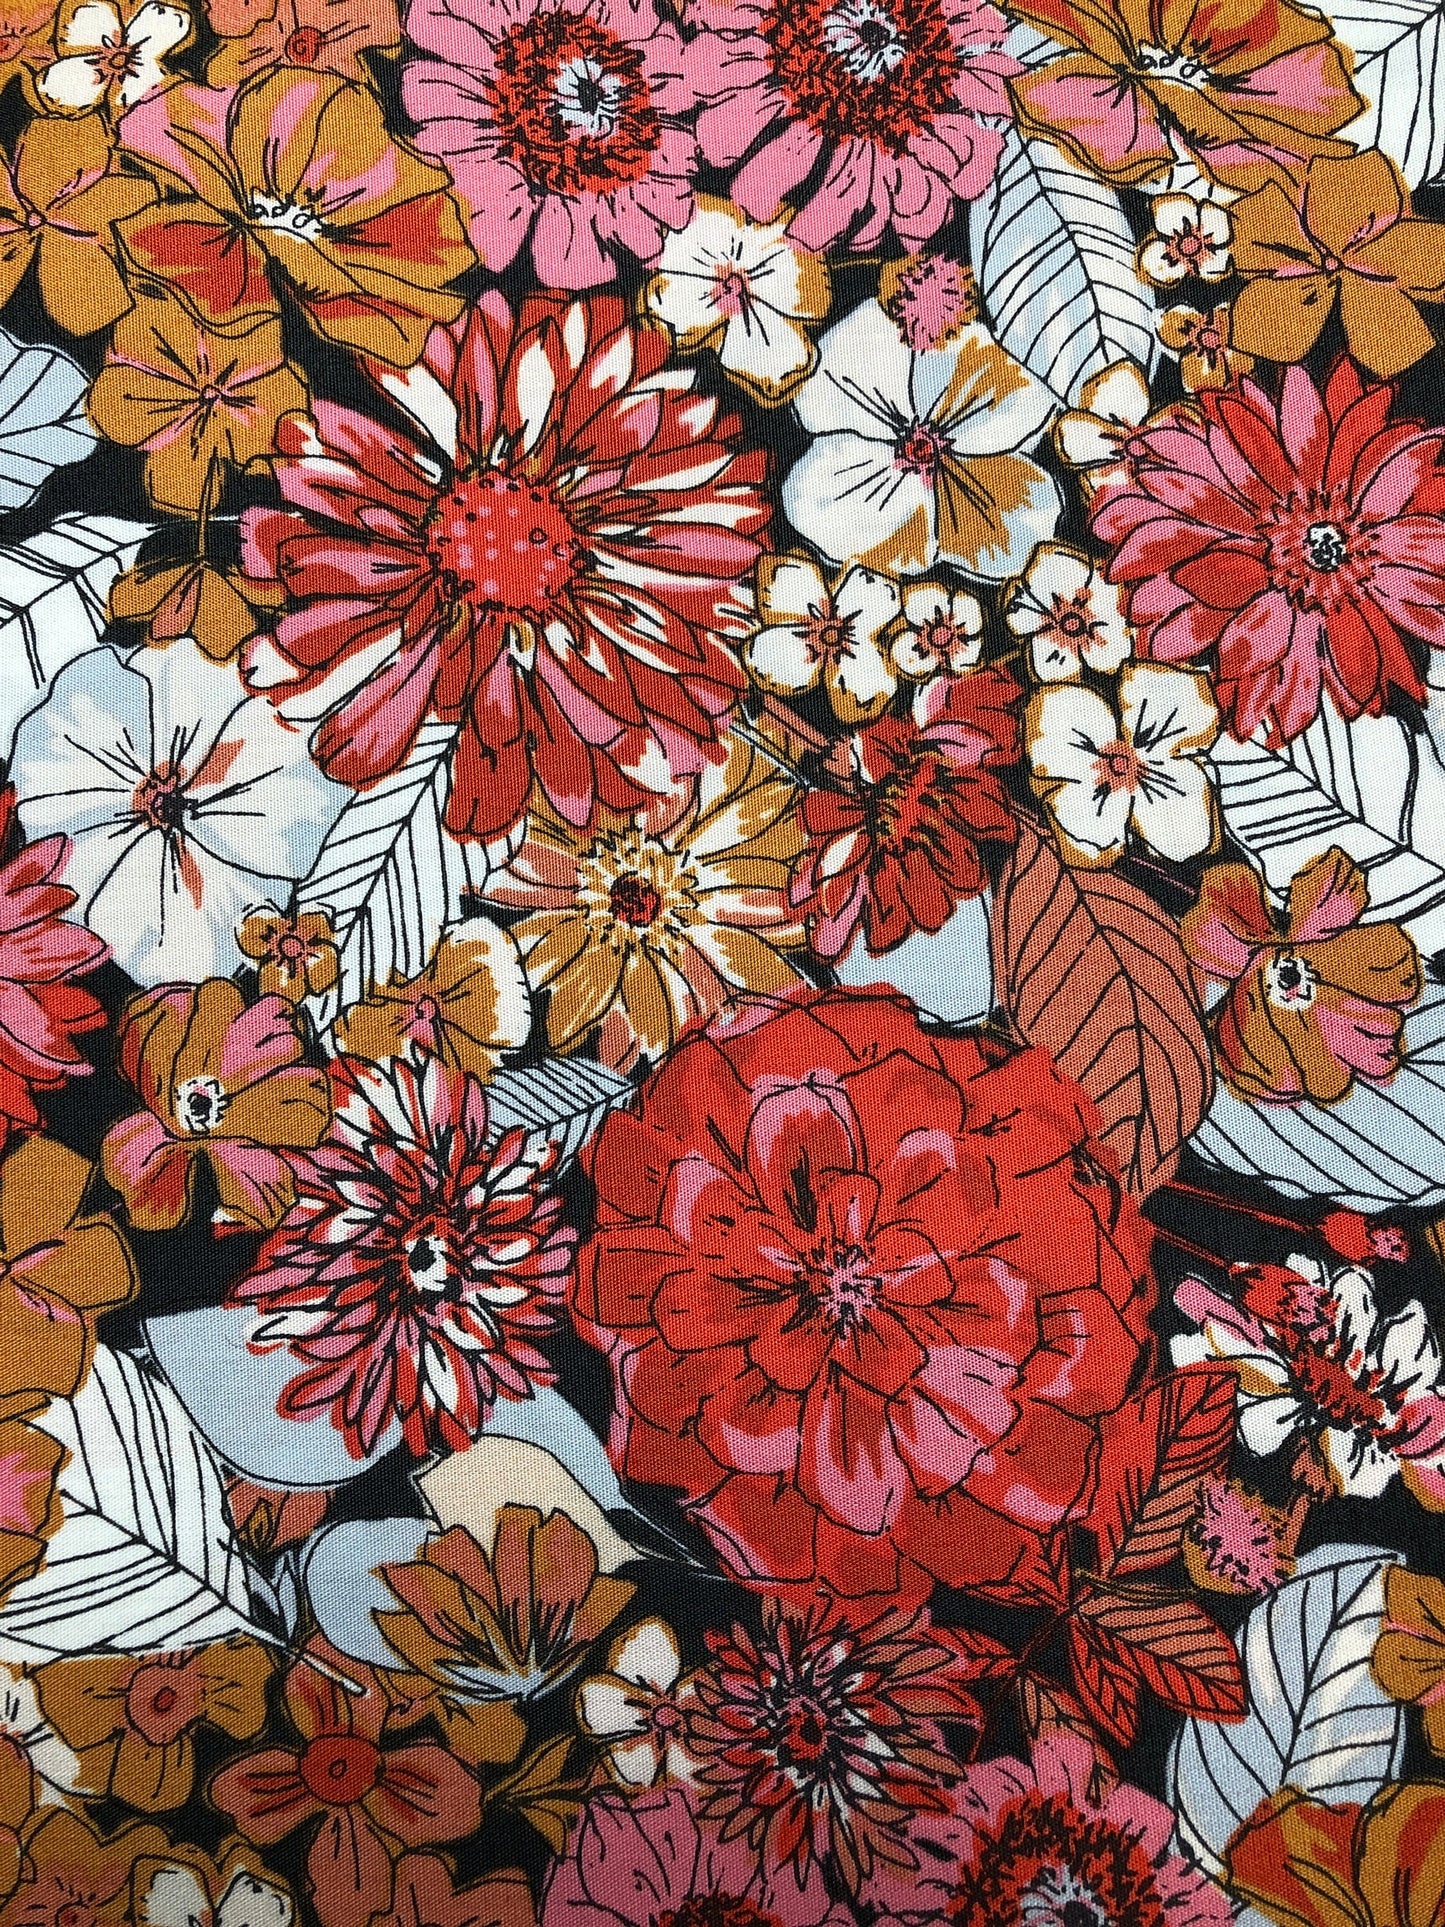 Art Gallery Kismet Fleuron Haven KSM-73300 Sharon Holland, Quilt Fabric, Cotton Fabric, Art Gallery Fabrics, Quilting, Fabric By The Yard